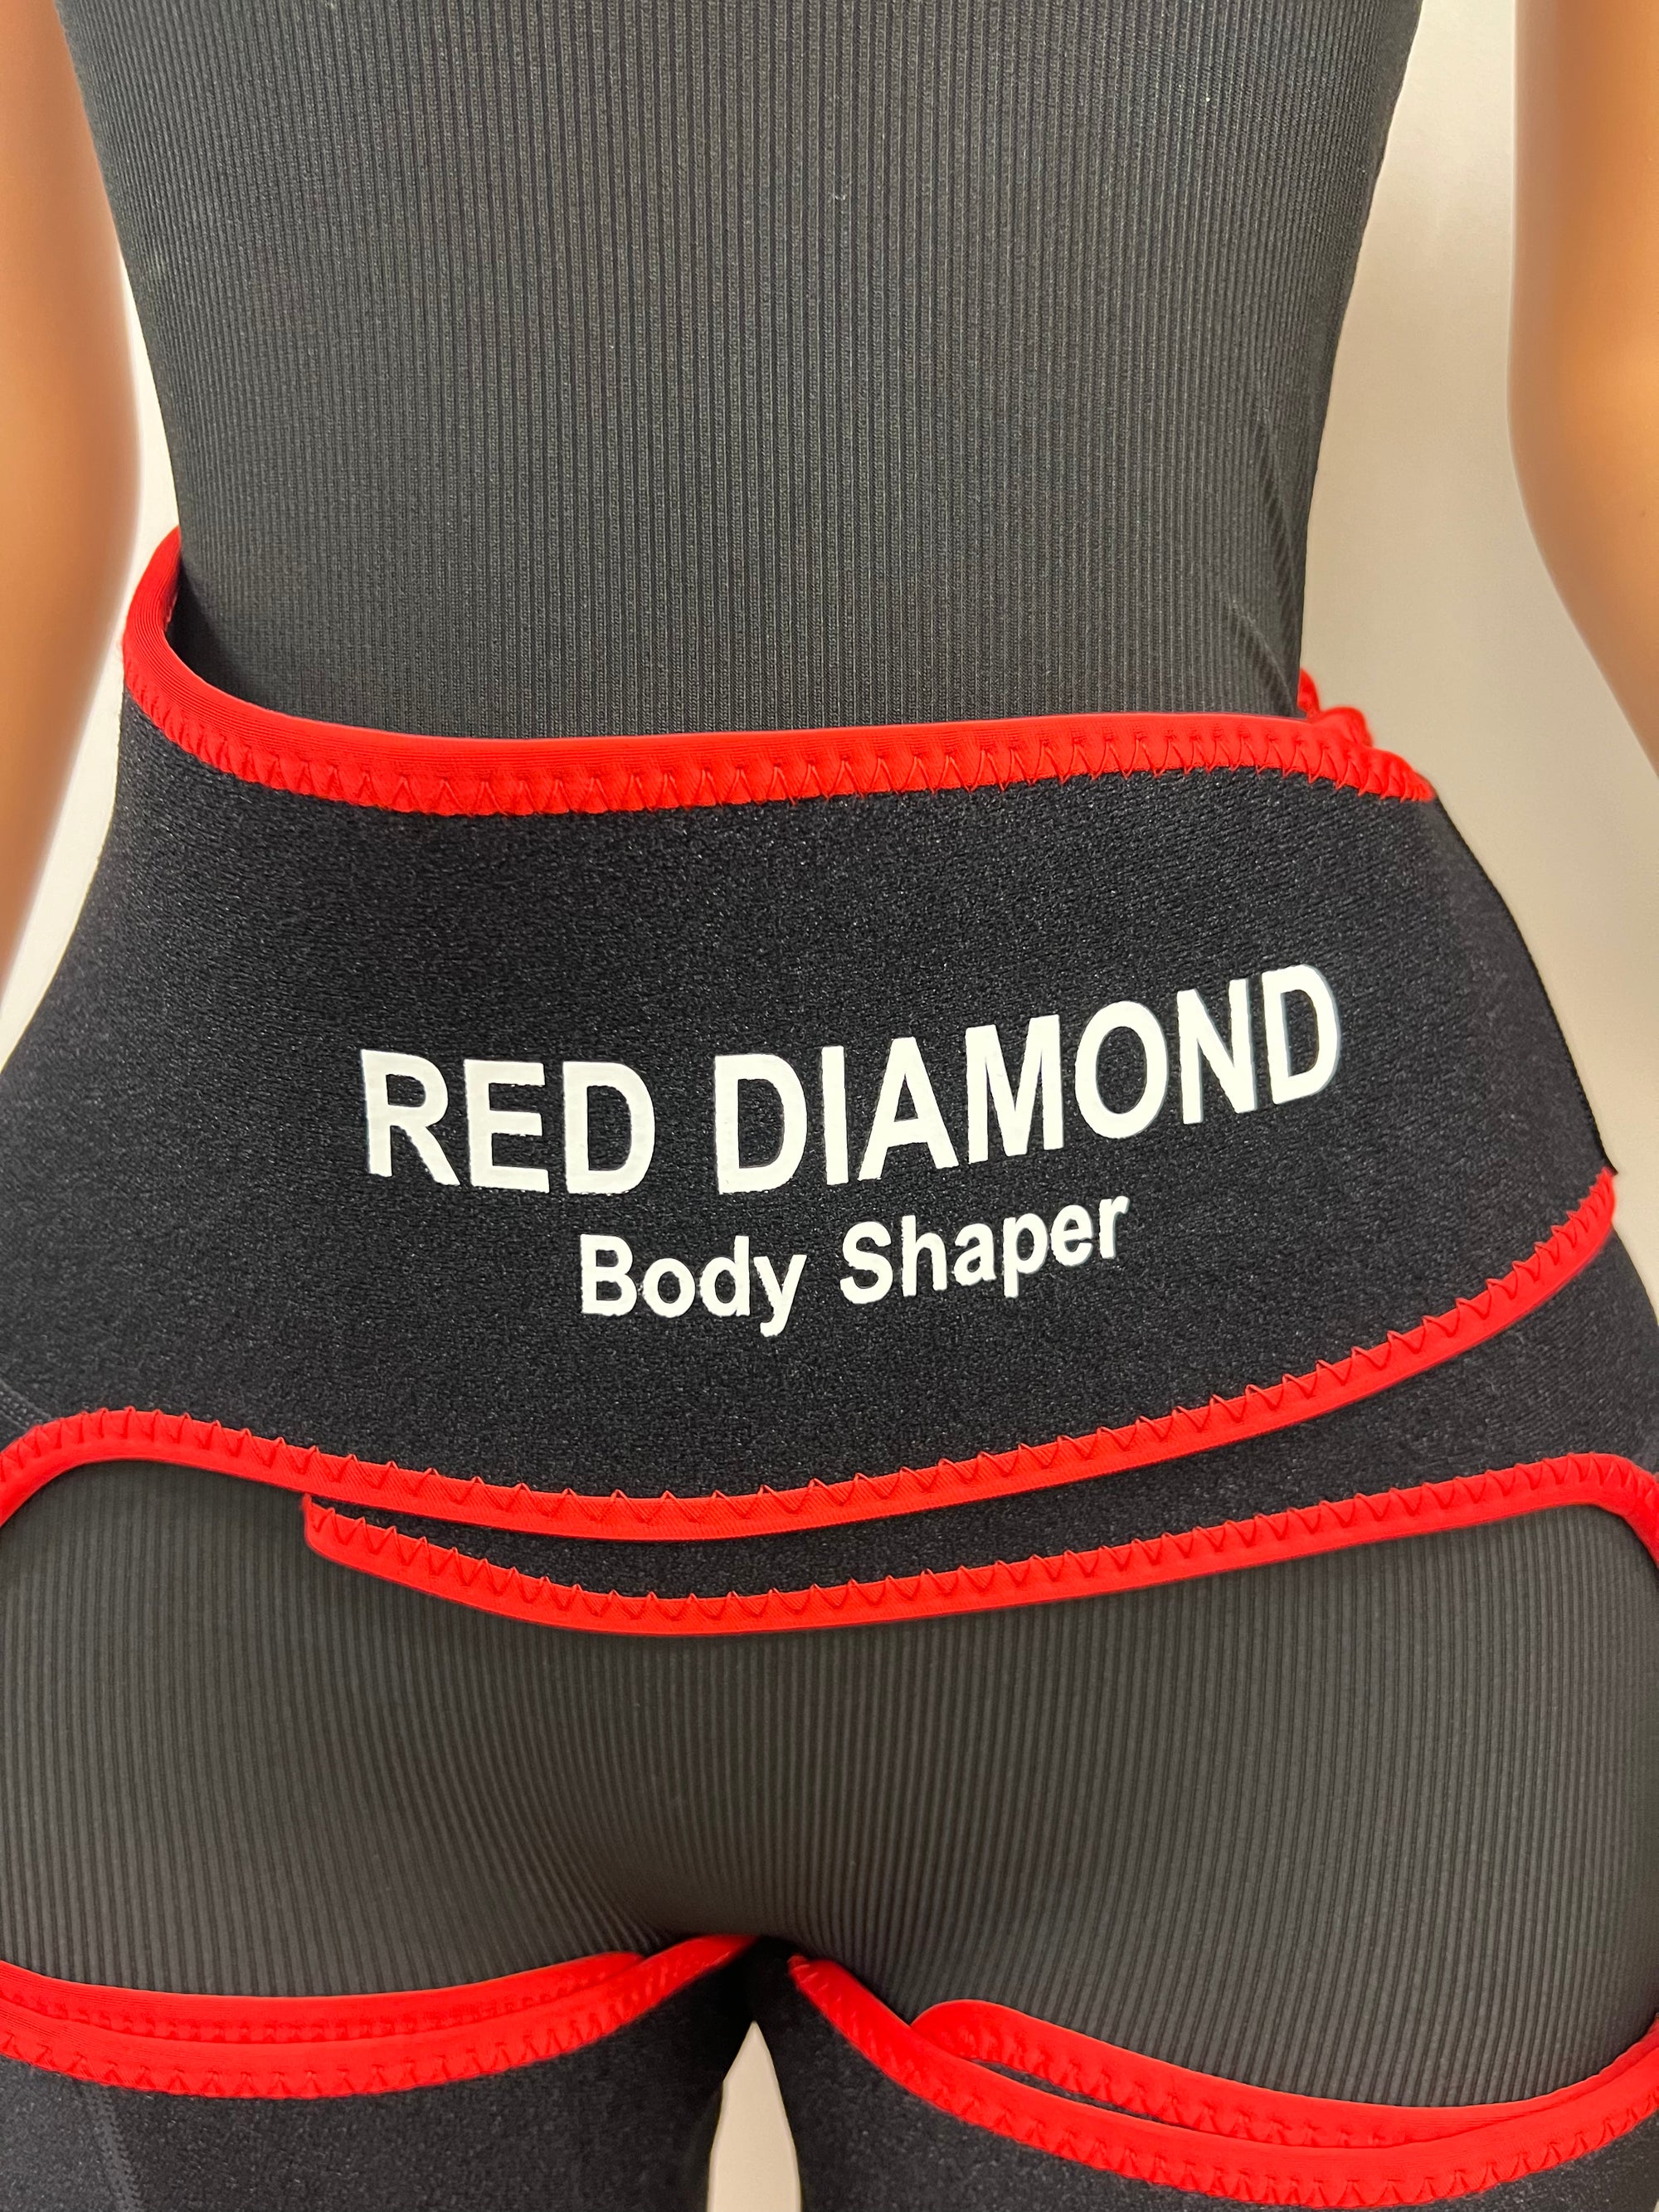 RED DIAMOND BOOTY LIFTER - RED DIAMOND STORE